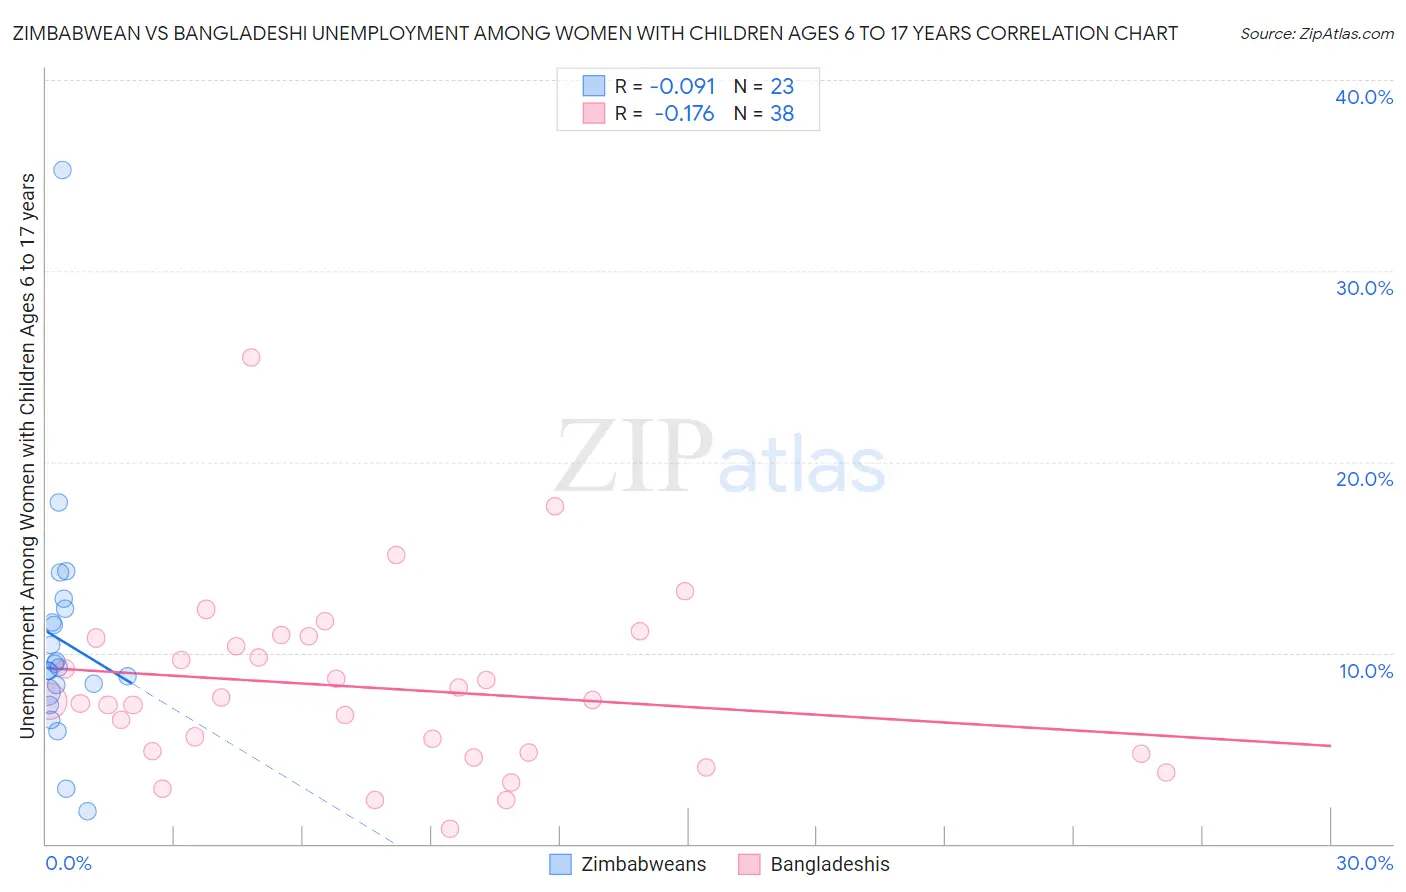 Zimbabwean vs Bangladeshi Unemployment Among Women with Children Ages 6 to 17 years